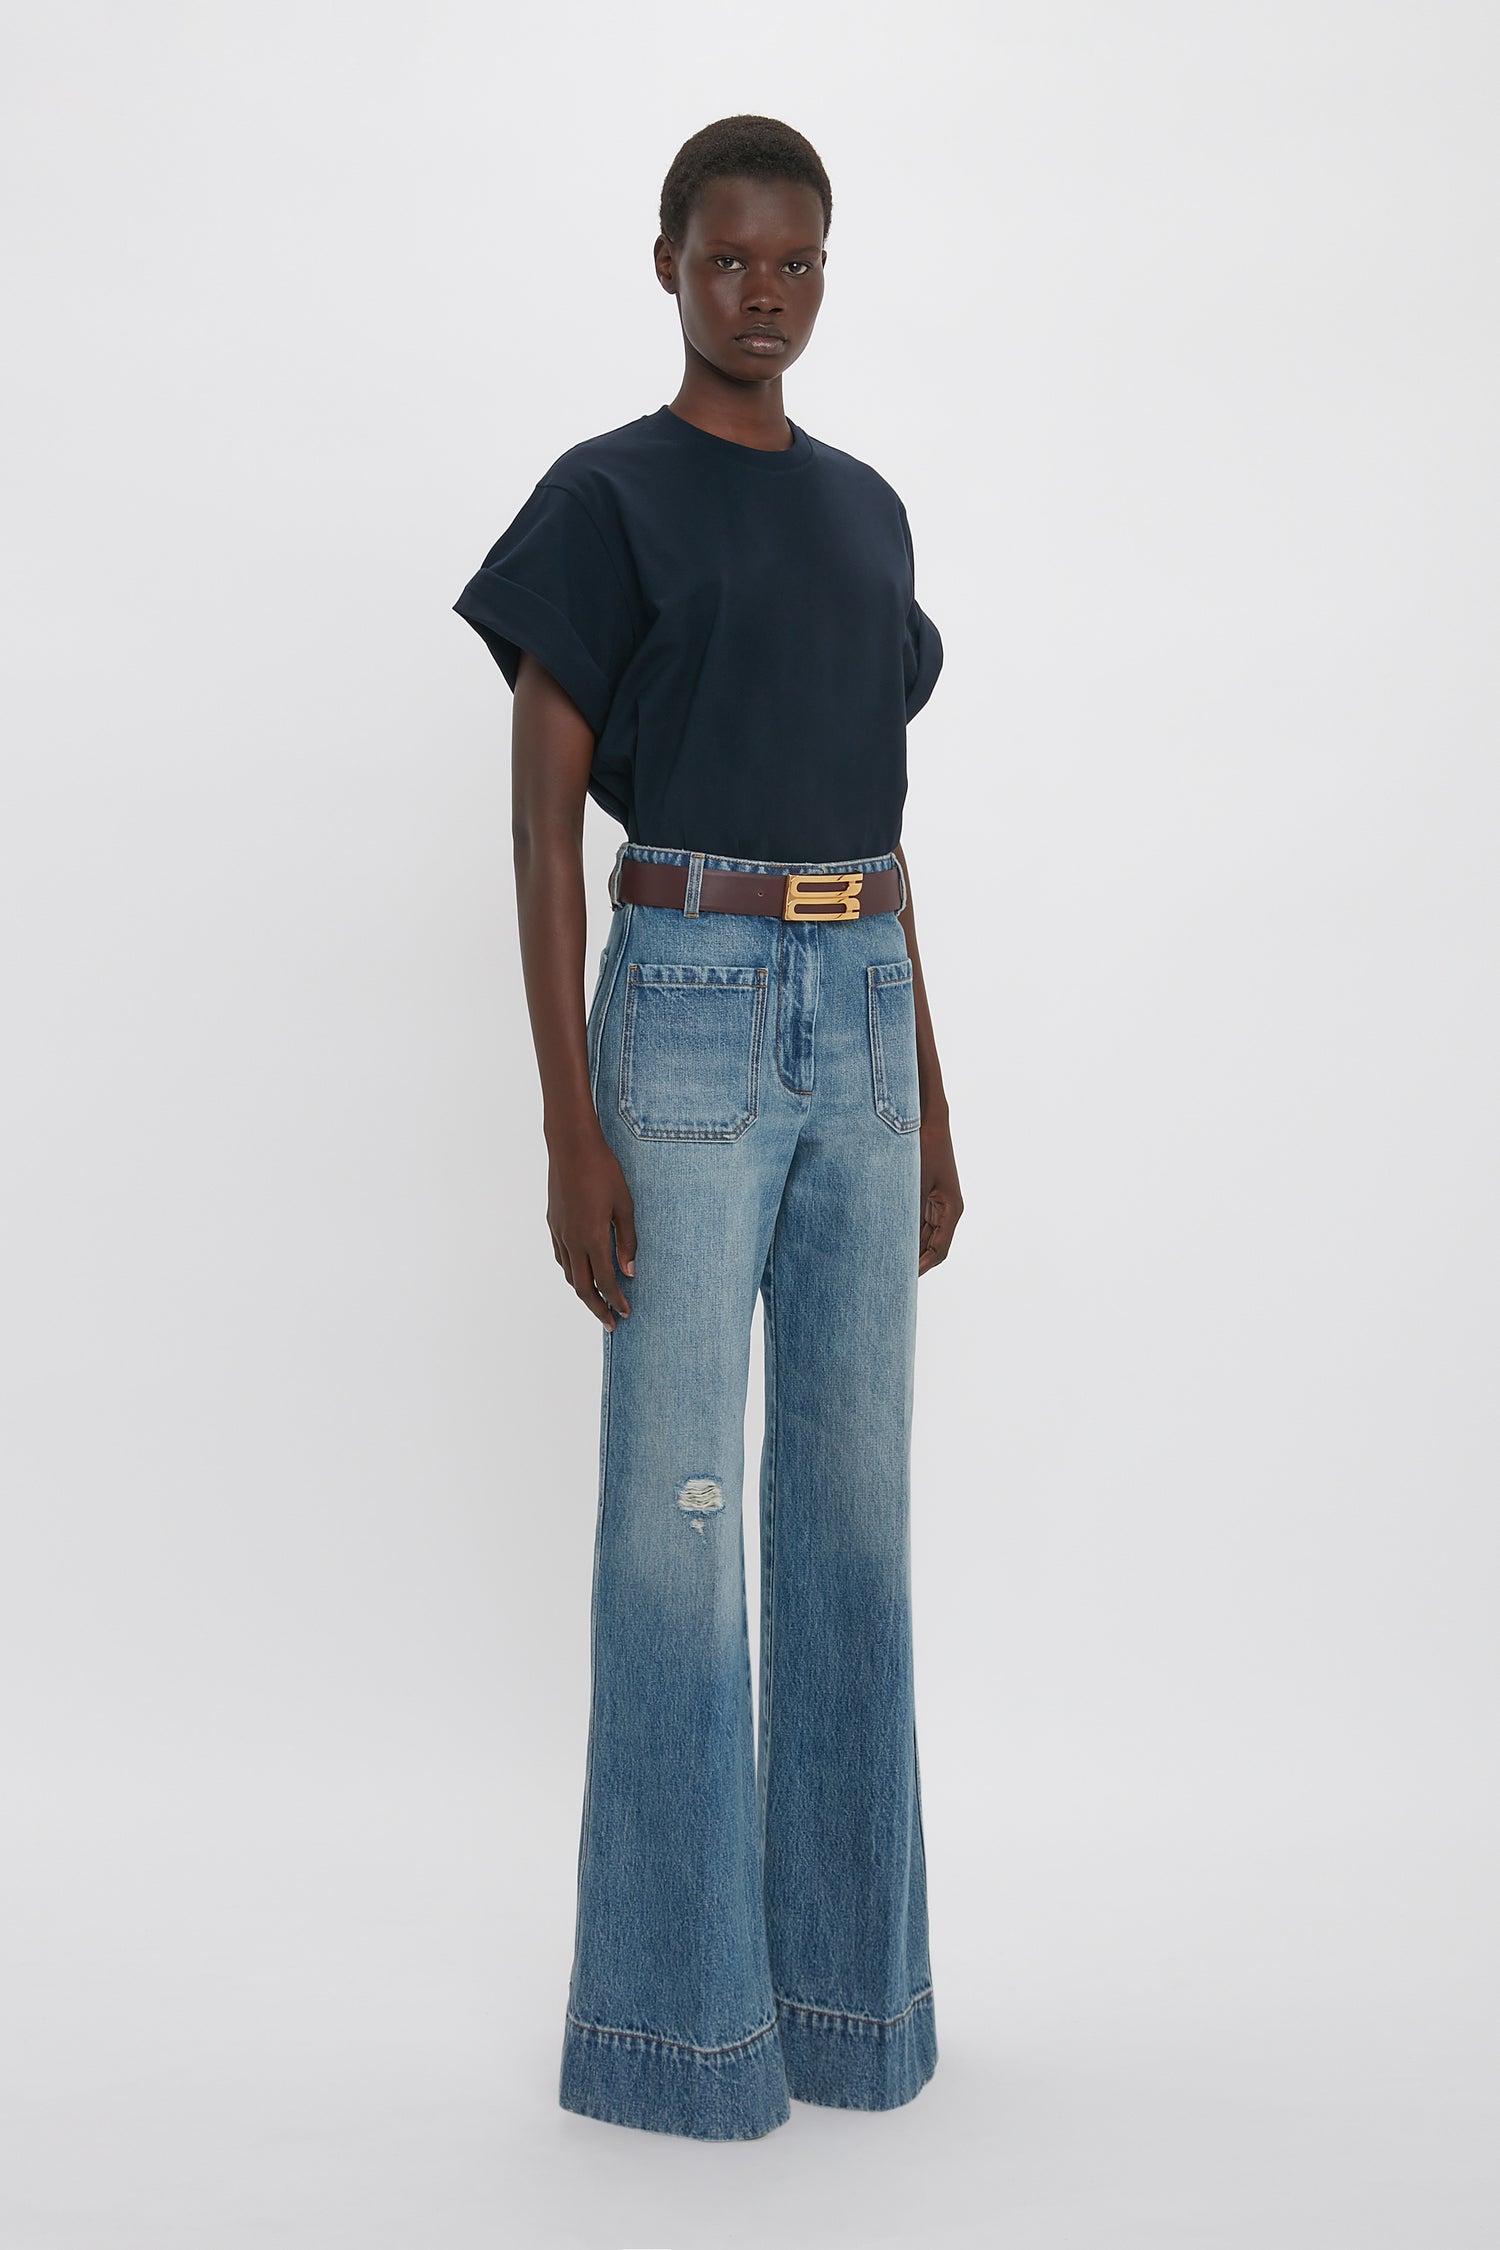 Person wearing an oversized Victoria Beckham Asymmetric Relaxed Fit T-Shirt In Navy with asymmetric folded sleeves, light blue wide-leg jeans with a rip on the left knee, and a brown belt, standing against a plain white background.